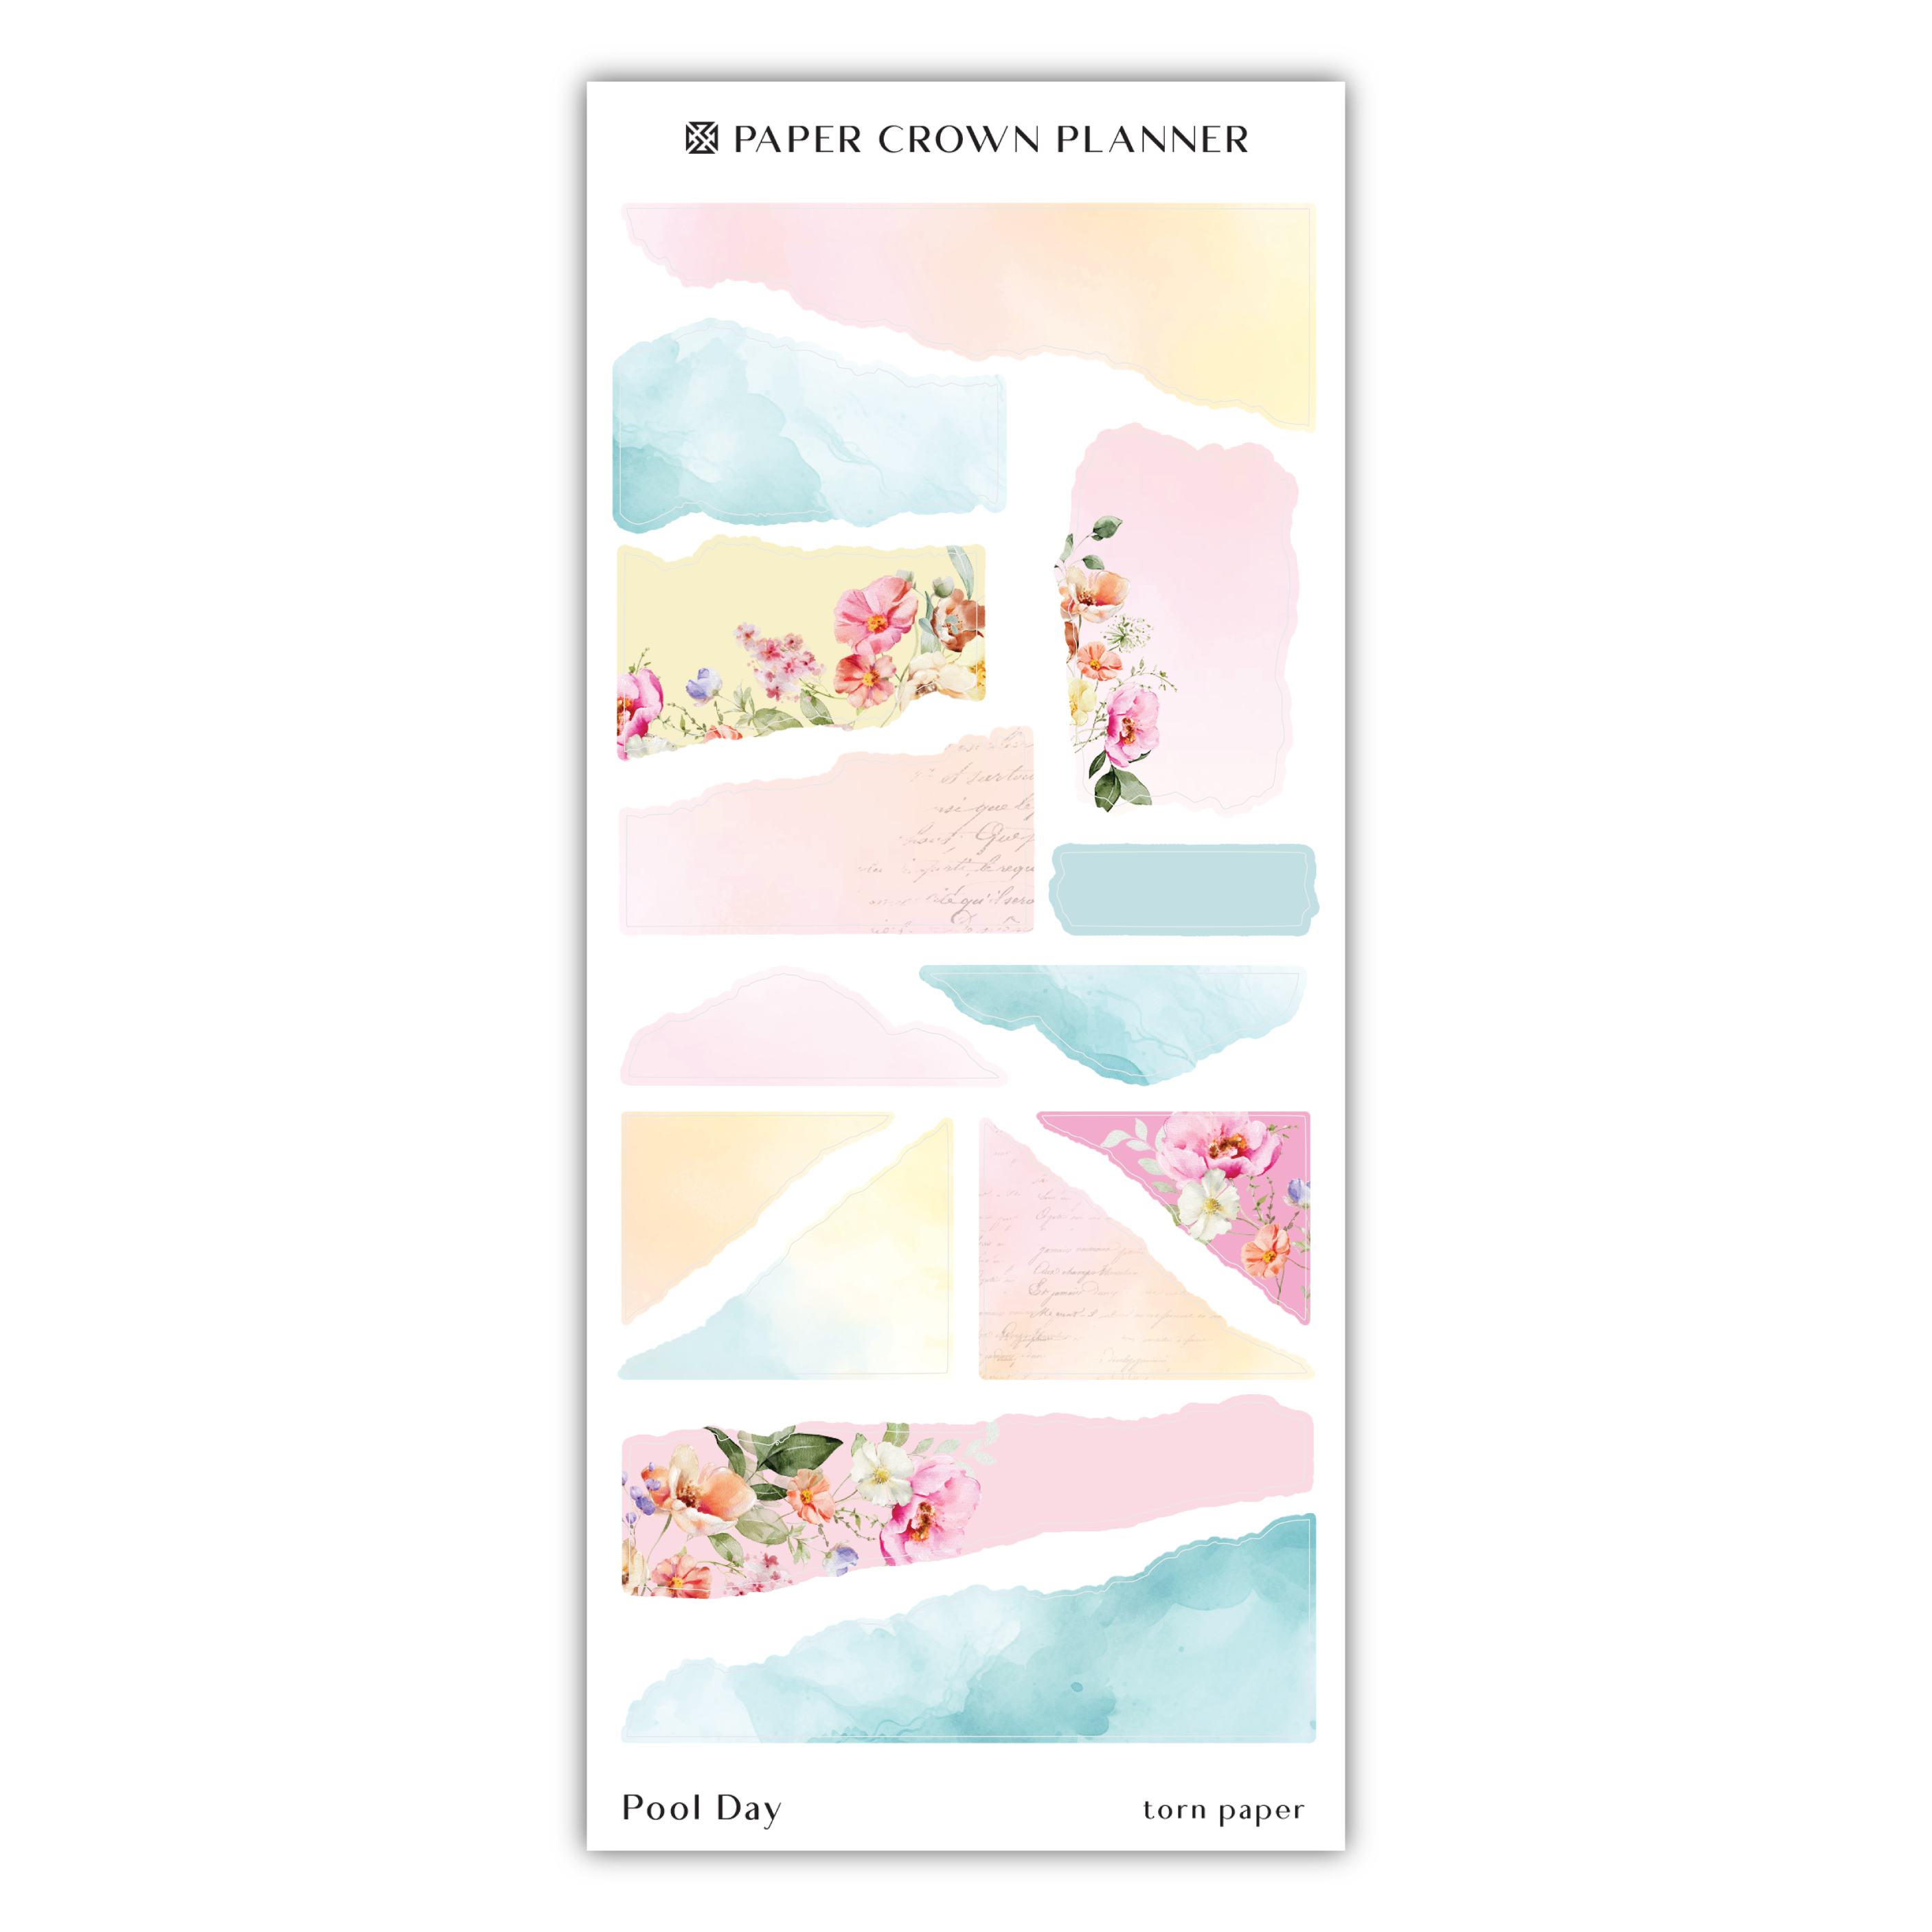 the paper crown planner sticker is shown with watercolor flowers